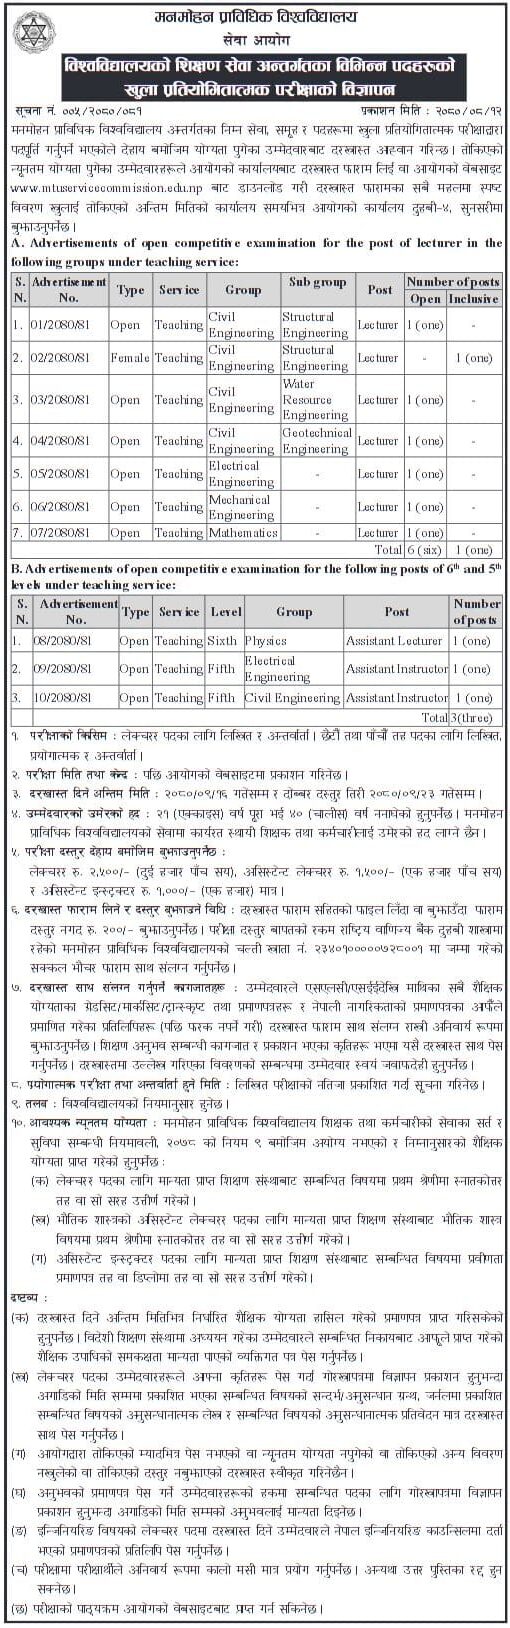 Manmohan Technical University Service Commission Vacancy 2080 for Various Posts